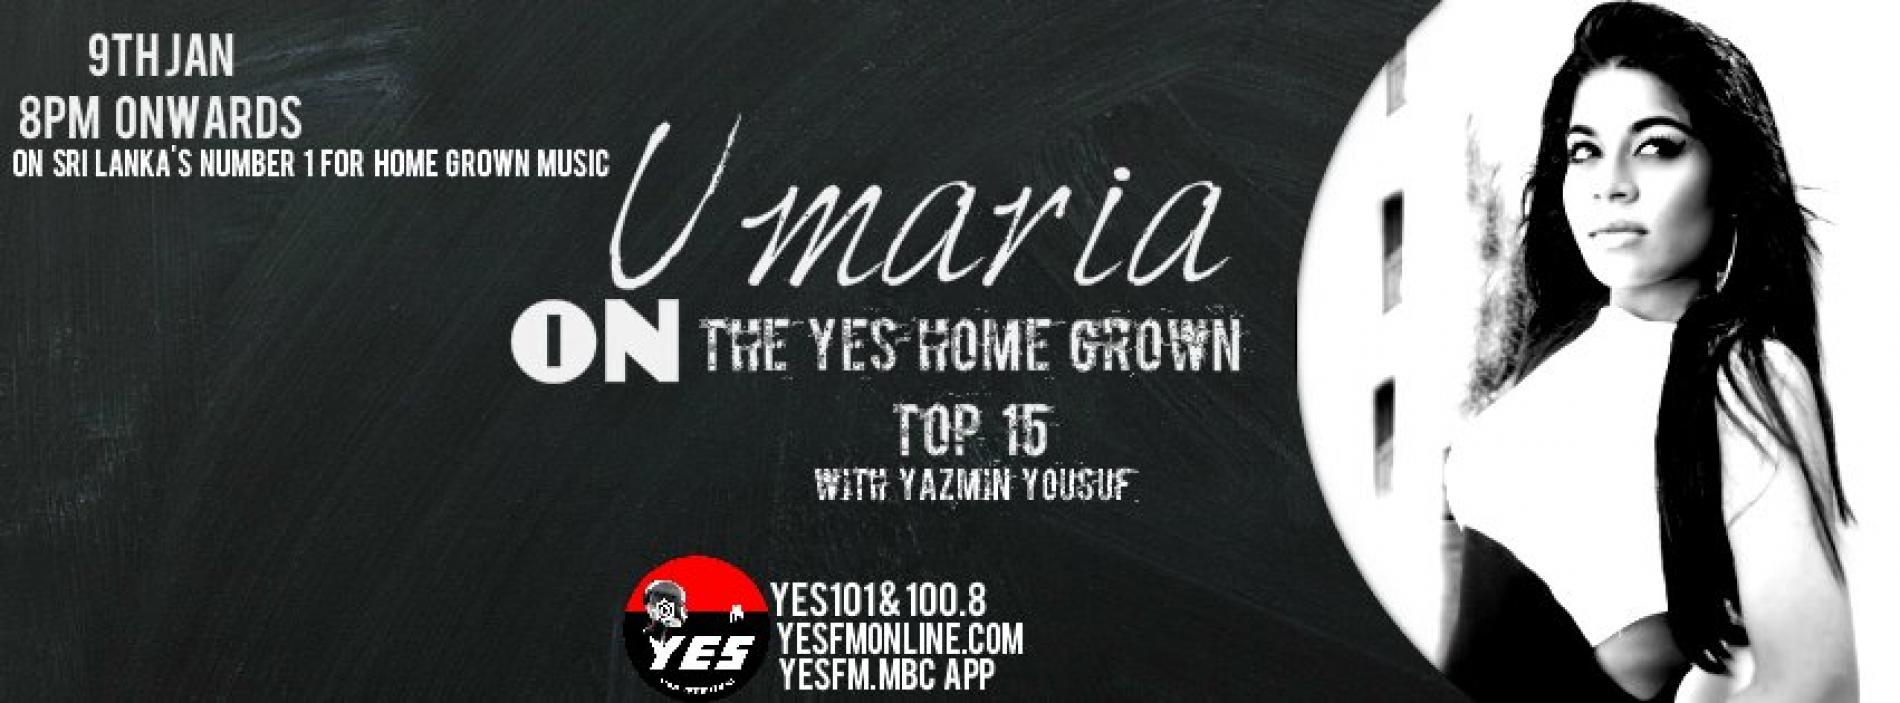 Umaria On The YES Home Grown Top 15